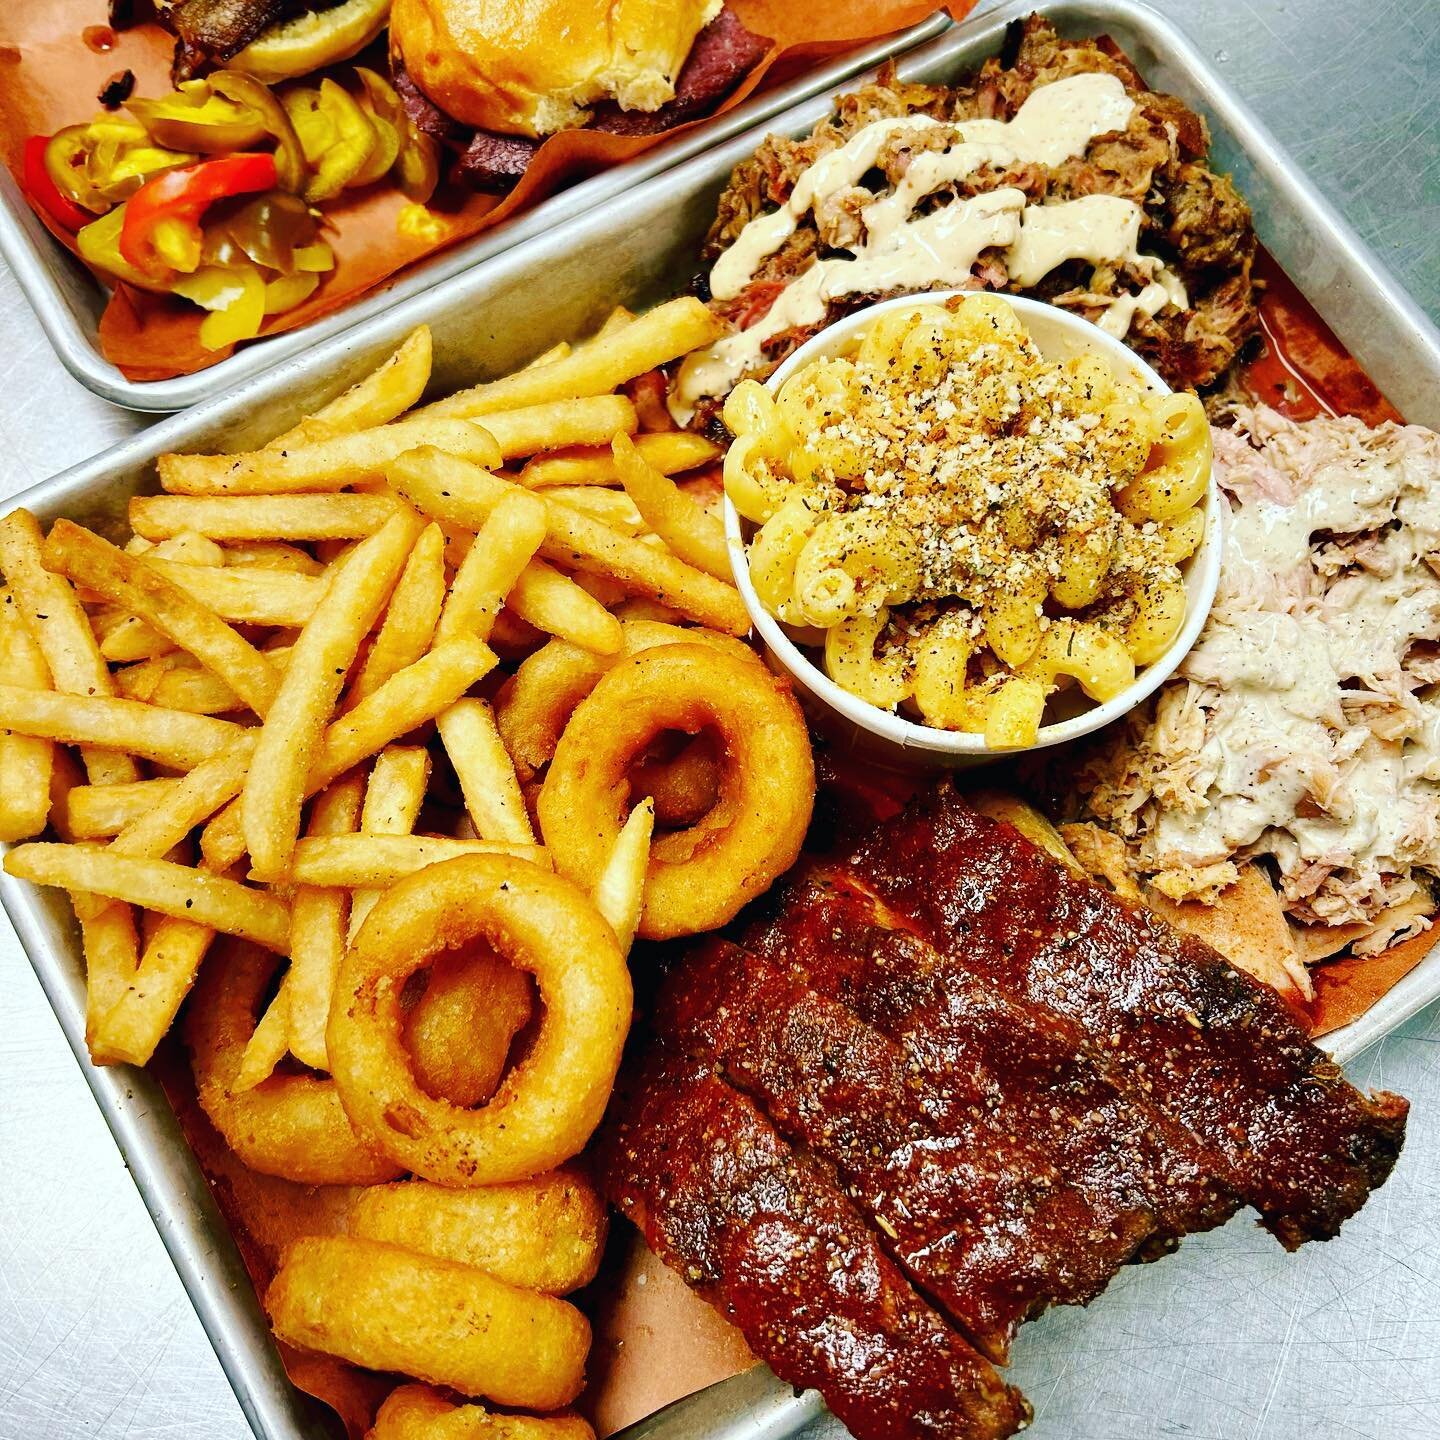 Busy weekend of sports? 

Let us take care of dinner with BBQ platters the whole family will love.

Dine in, take out and delivery (via Uber eats &amp; Grub Hub.) 

#odeensbbq #ridgefieldct #ridgefieldmoms